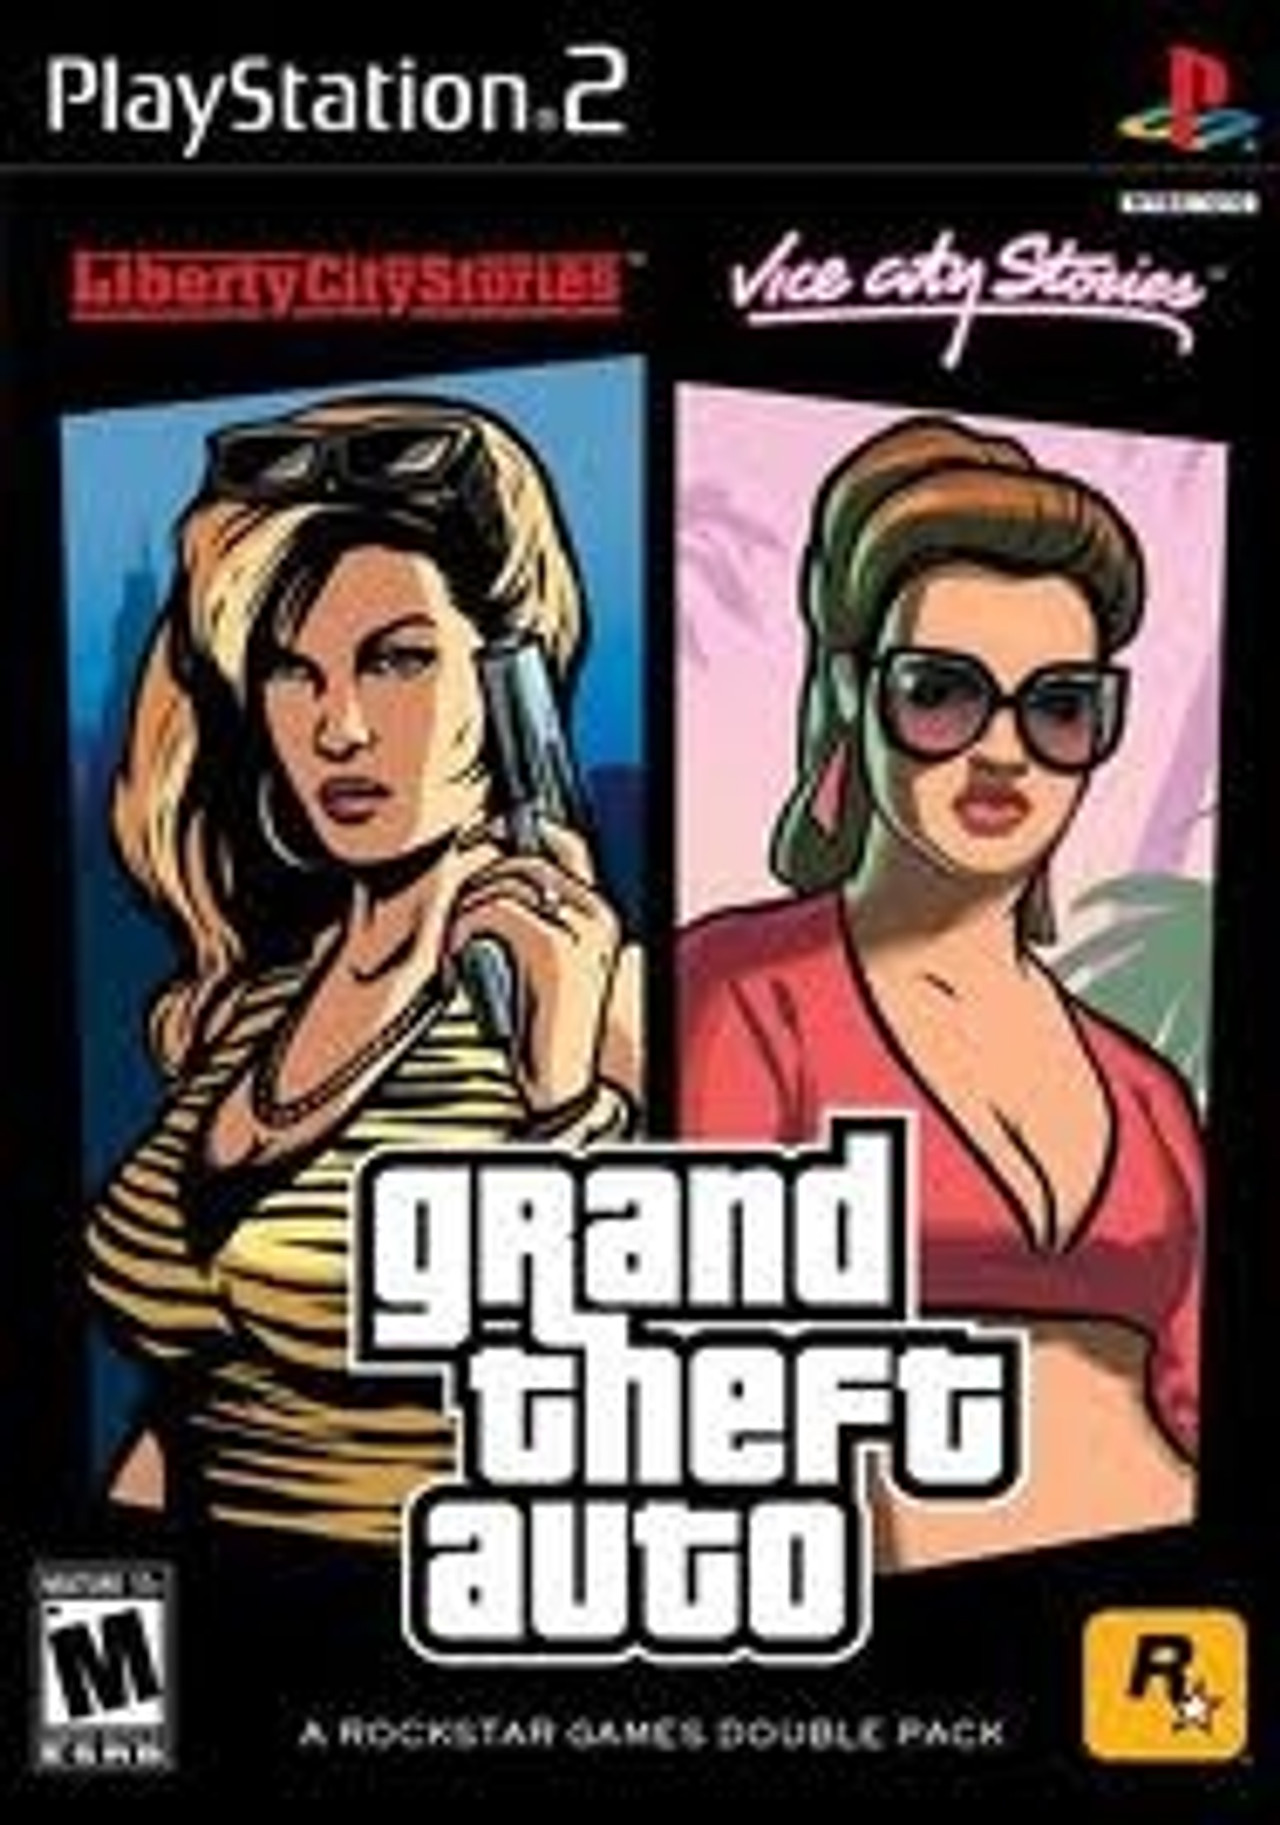 Gta Double Pack Liberty Cityvice City Stories Ps2 Game For Sale Dkoldies 9373